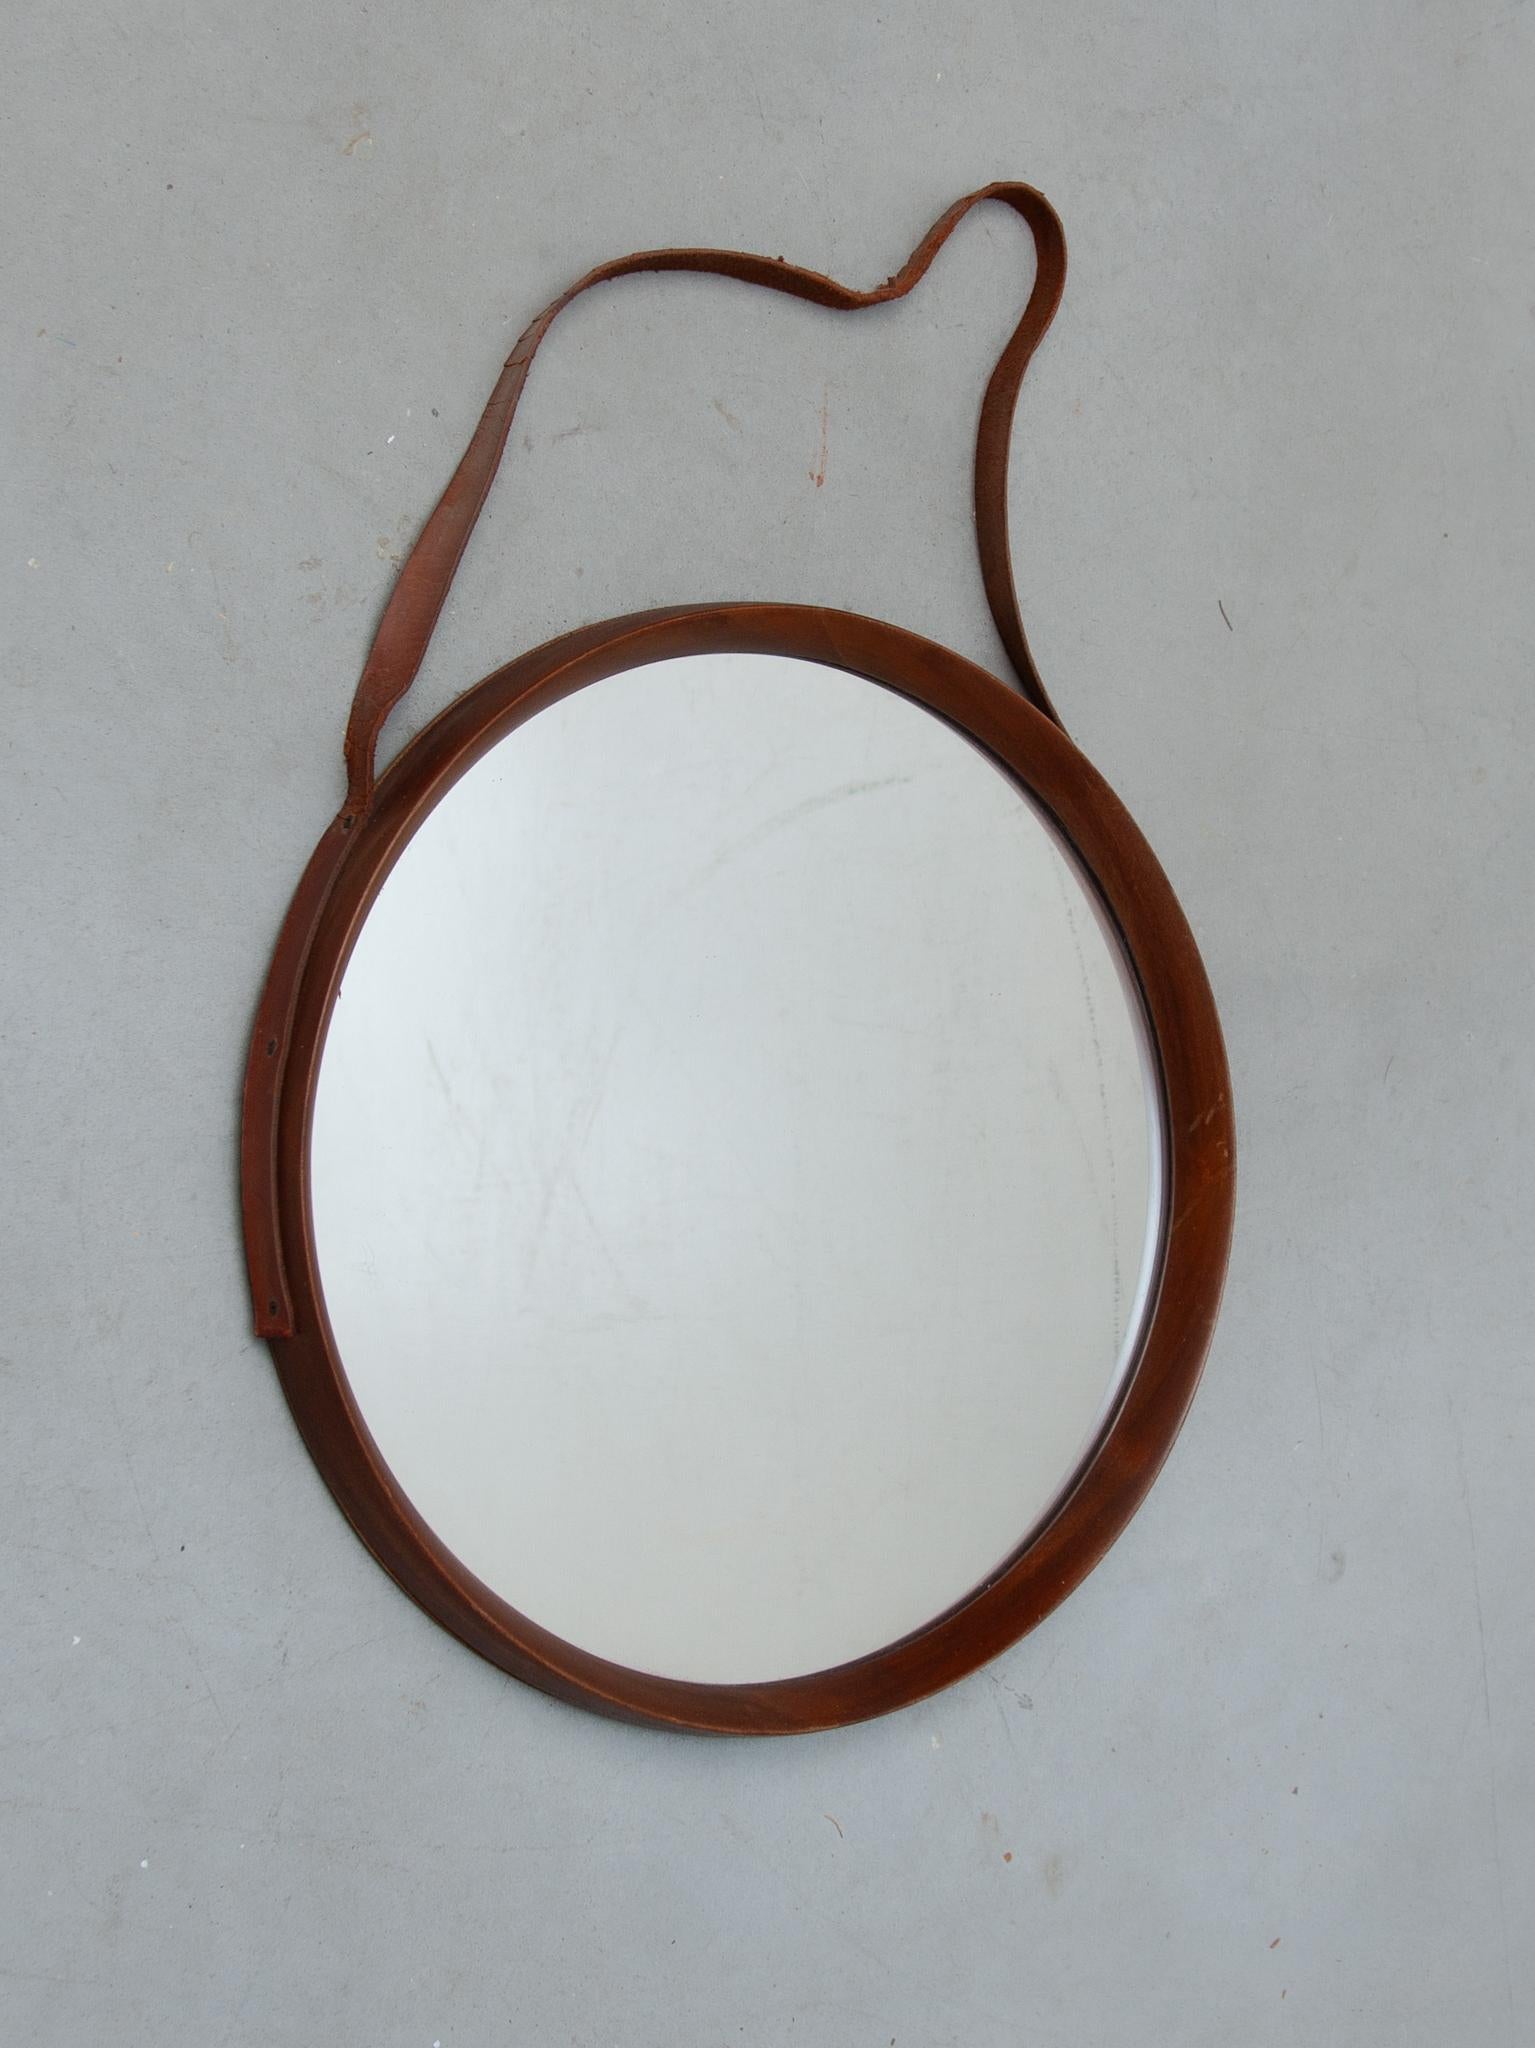 A beautiful round mirror in teak, manufactured in Denmark in the 1960's. 
The joinery is a sign of true craftsmanship. The mirror is in very good vintage condition. The leather hanging for the mirror has deteriorated through use and time.